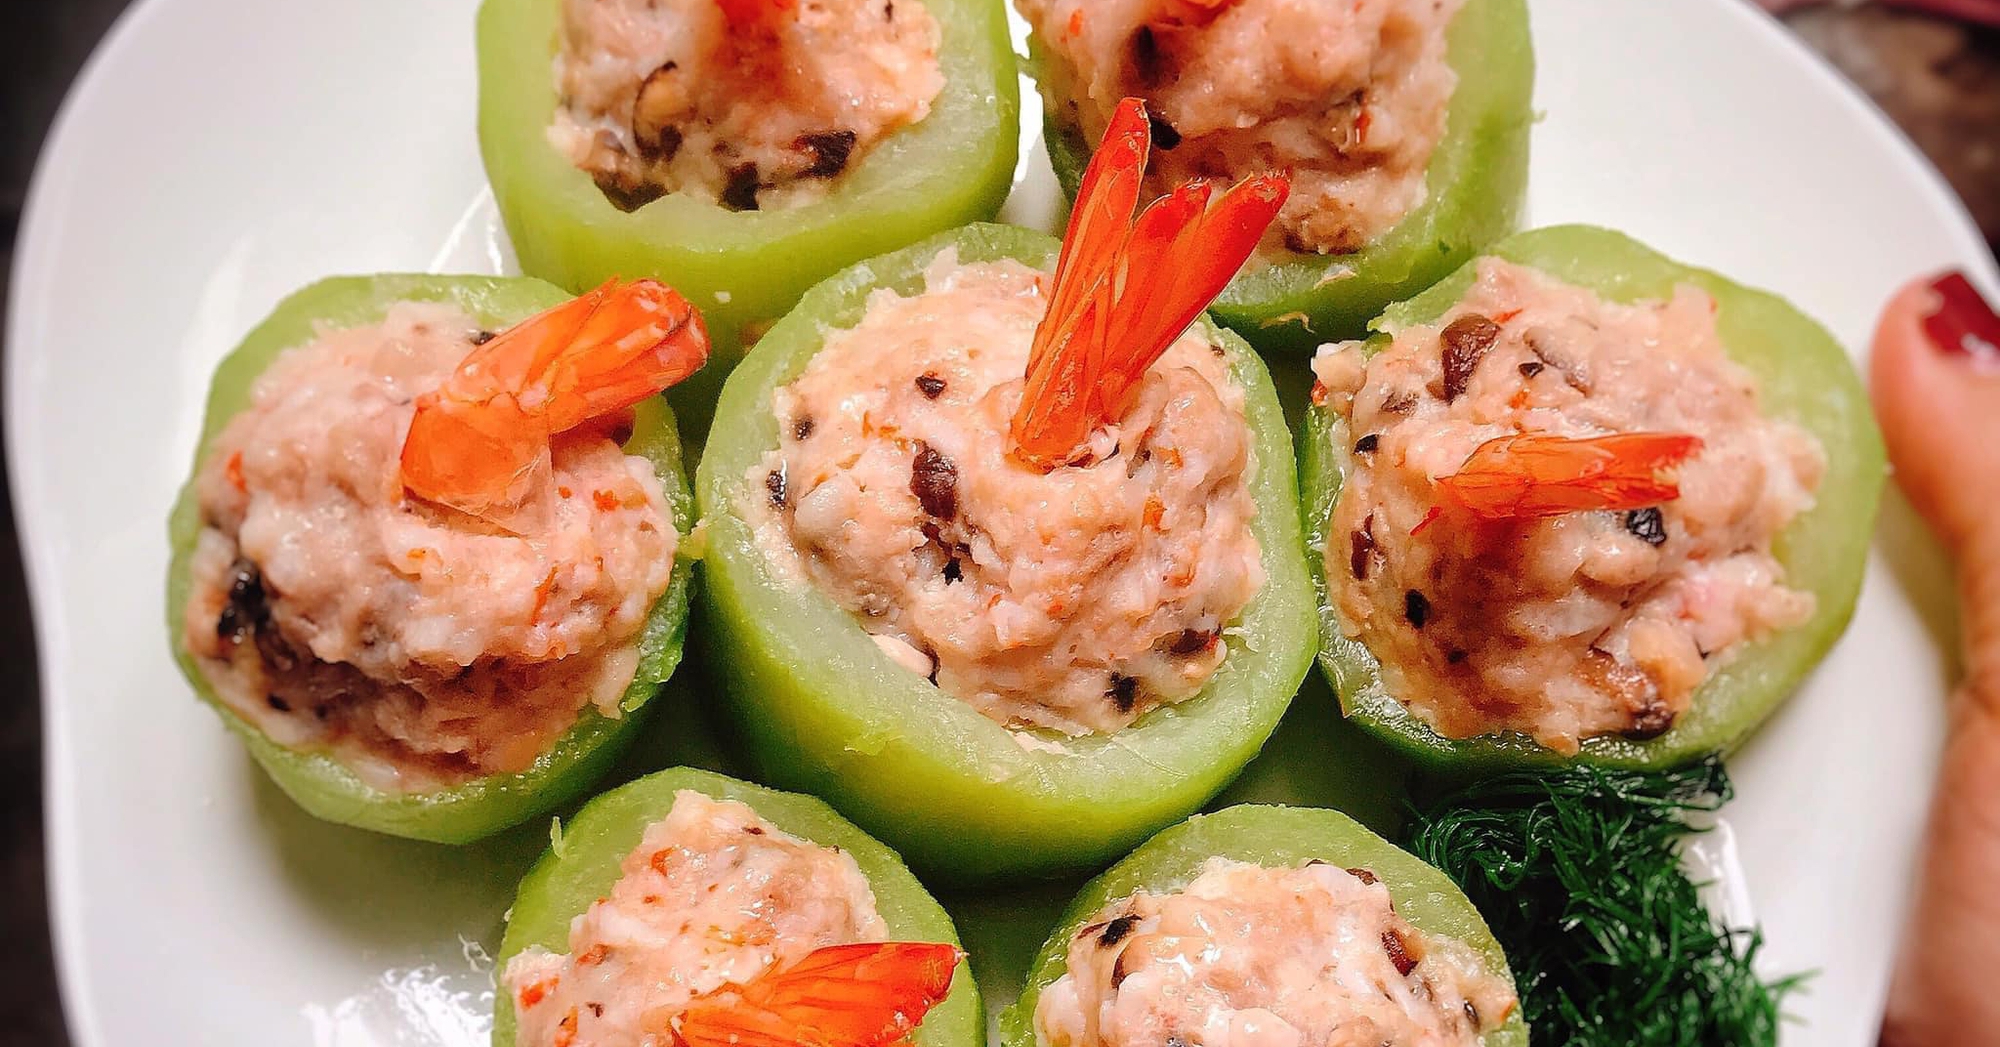 Suggest three delicious shrimp dishes for a cool summer meal